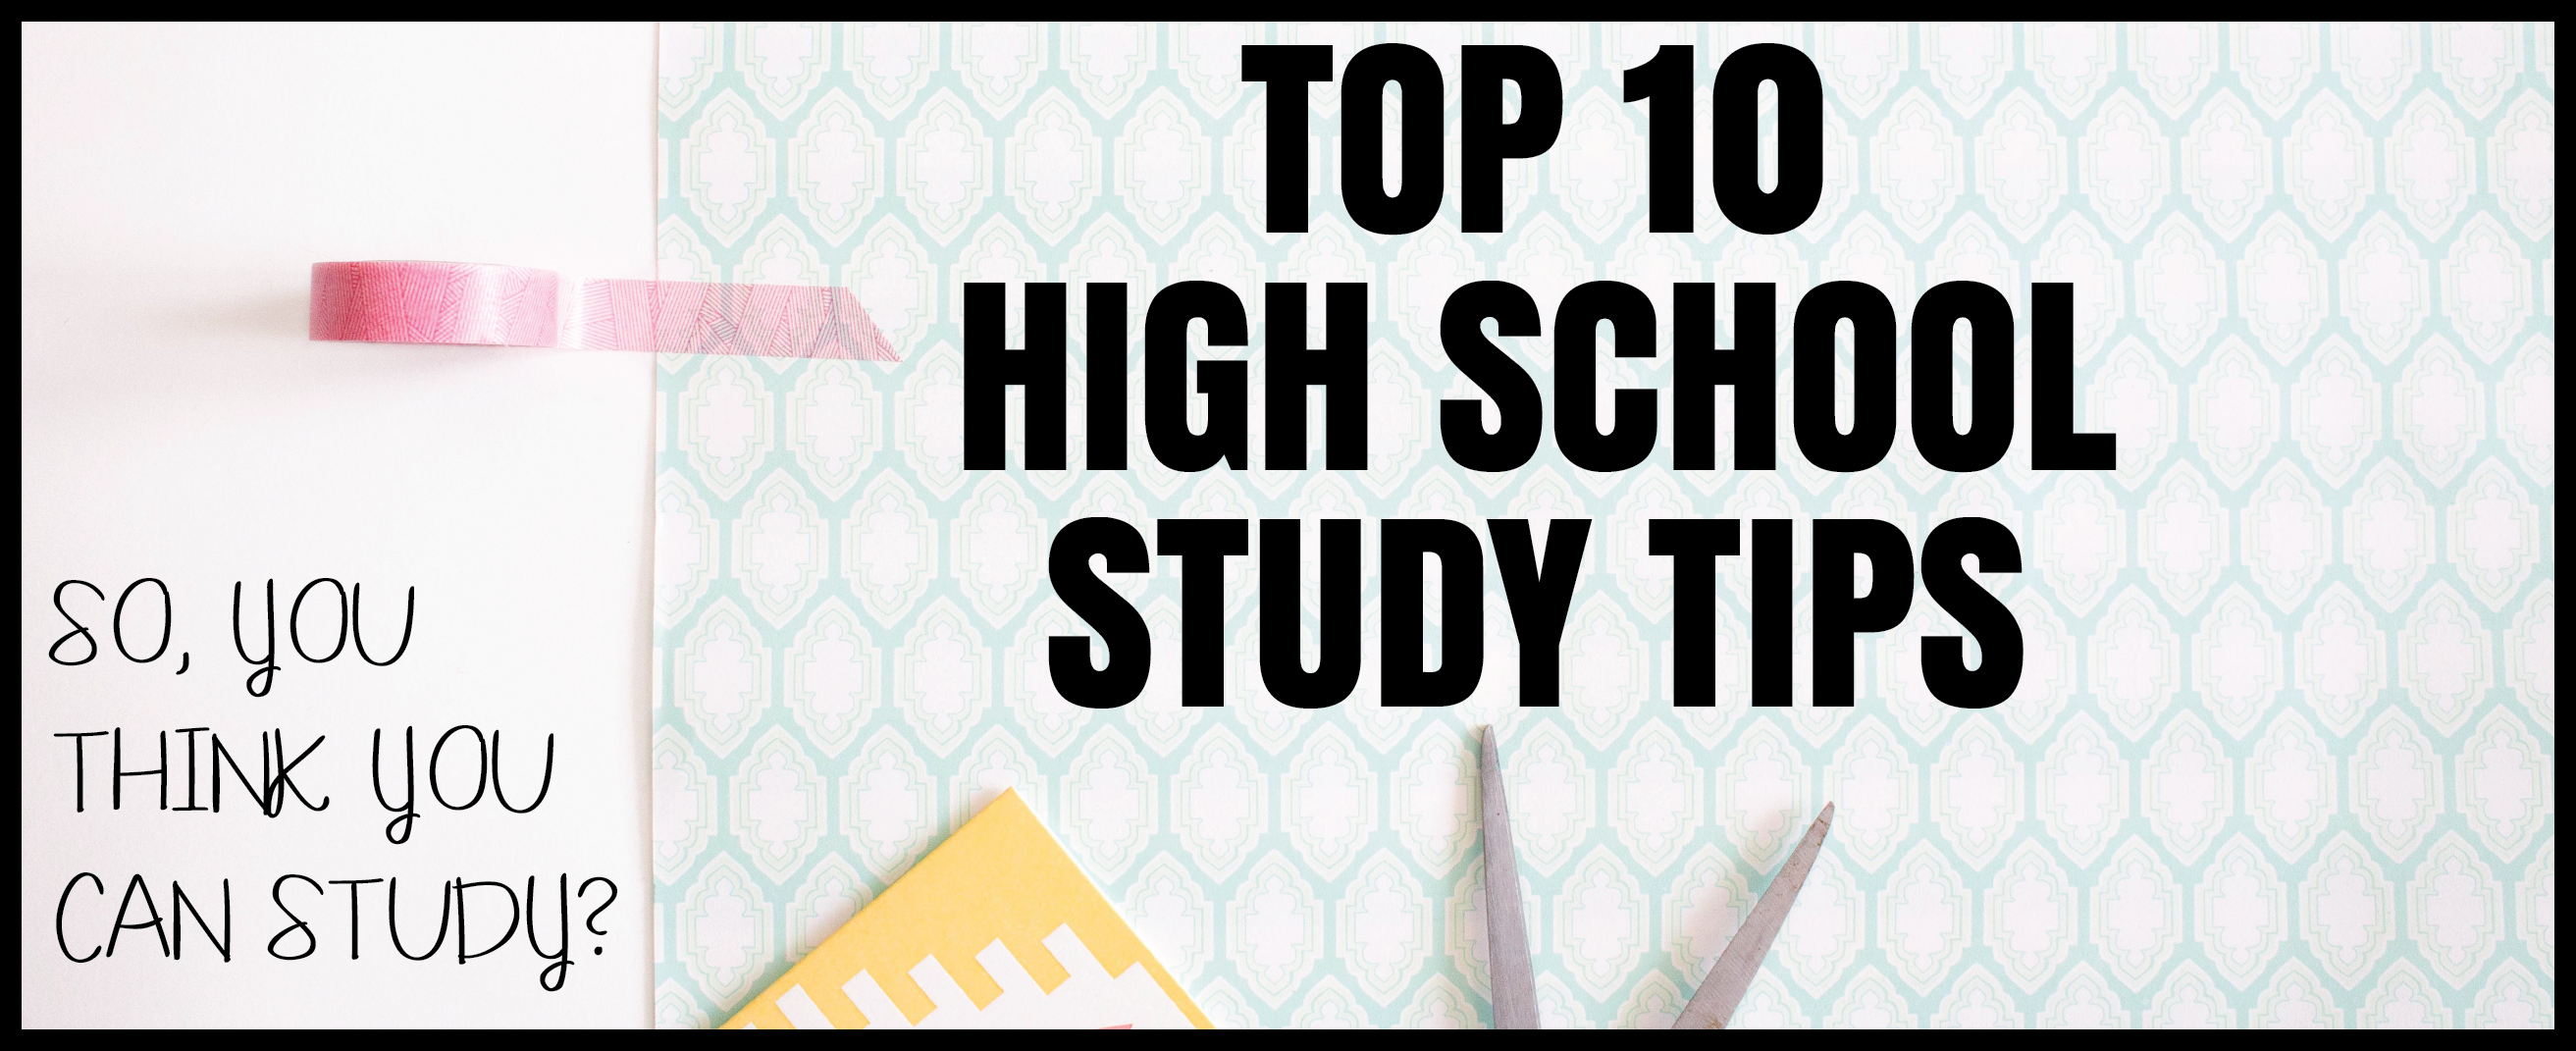 Top 10 High School Study Tips and Habits